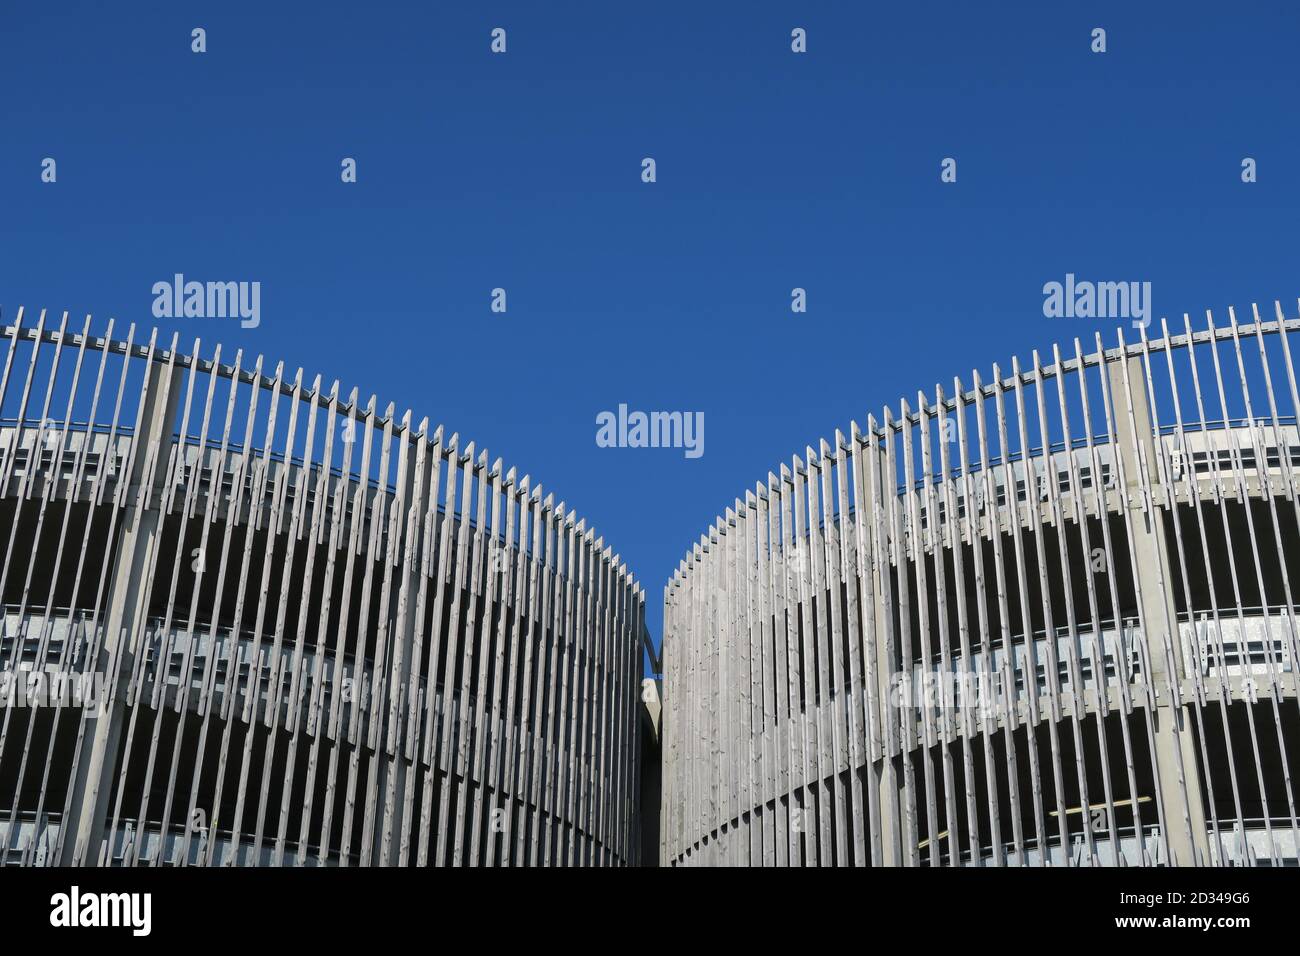 An abstract image showing architectural detail of a multi-storey car park. Stock Photo